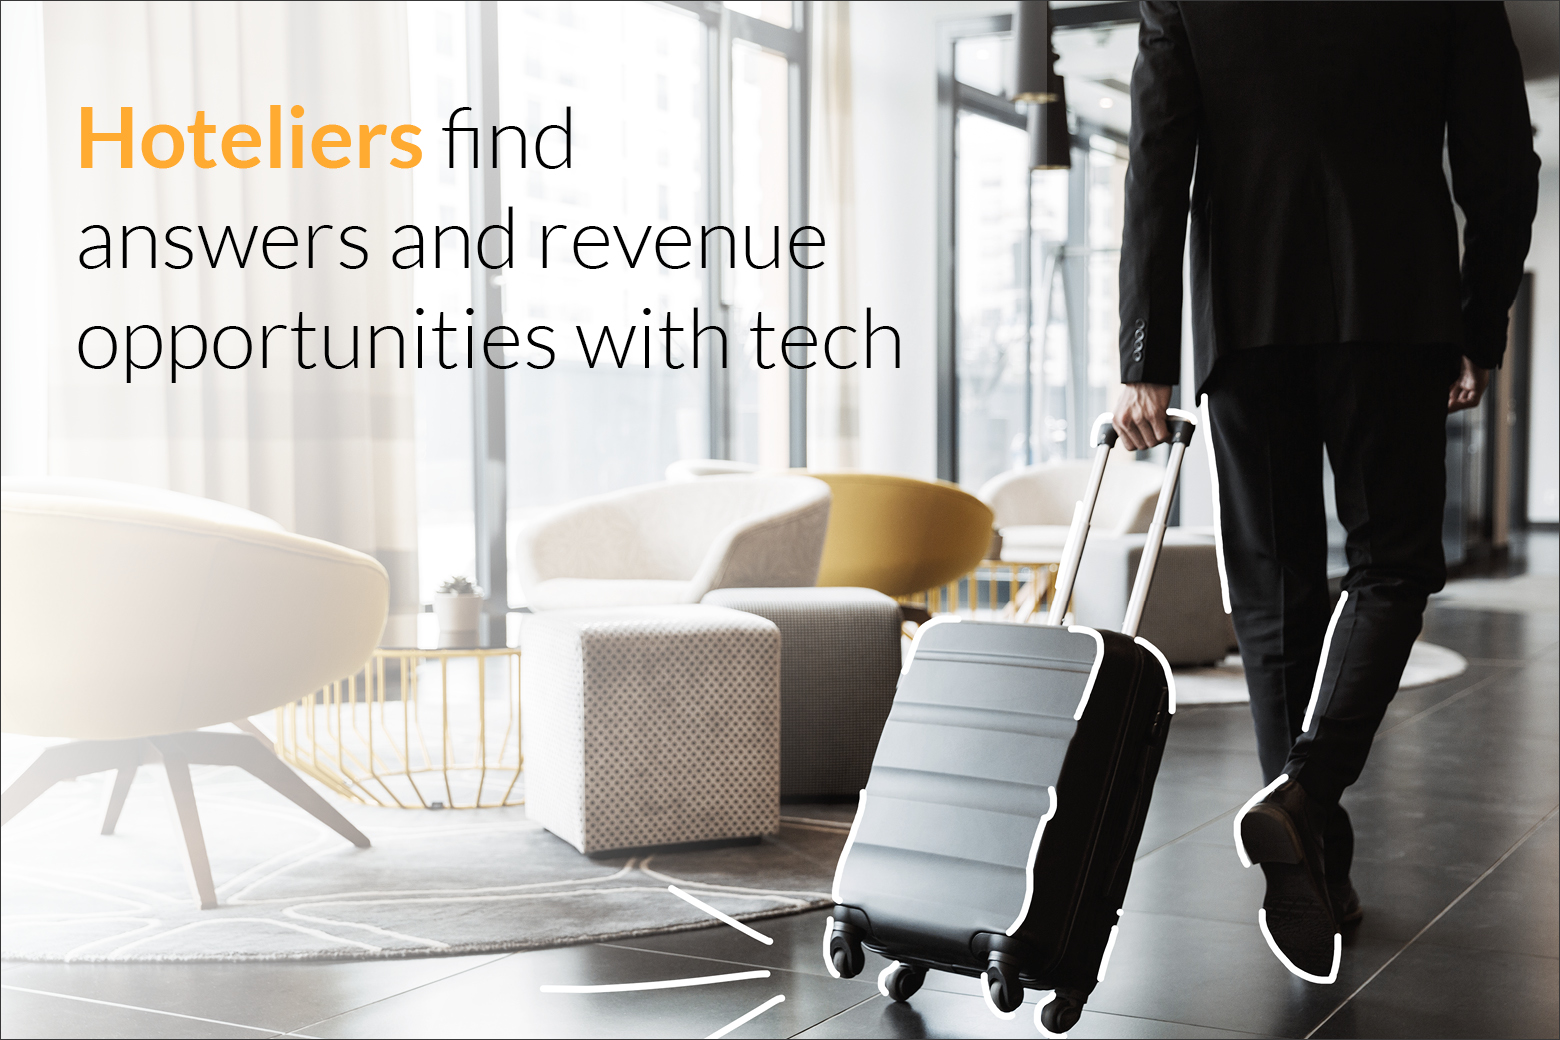 hoteliers find answers and revenue opportunities with tech